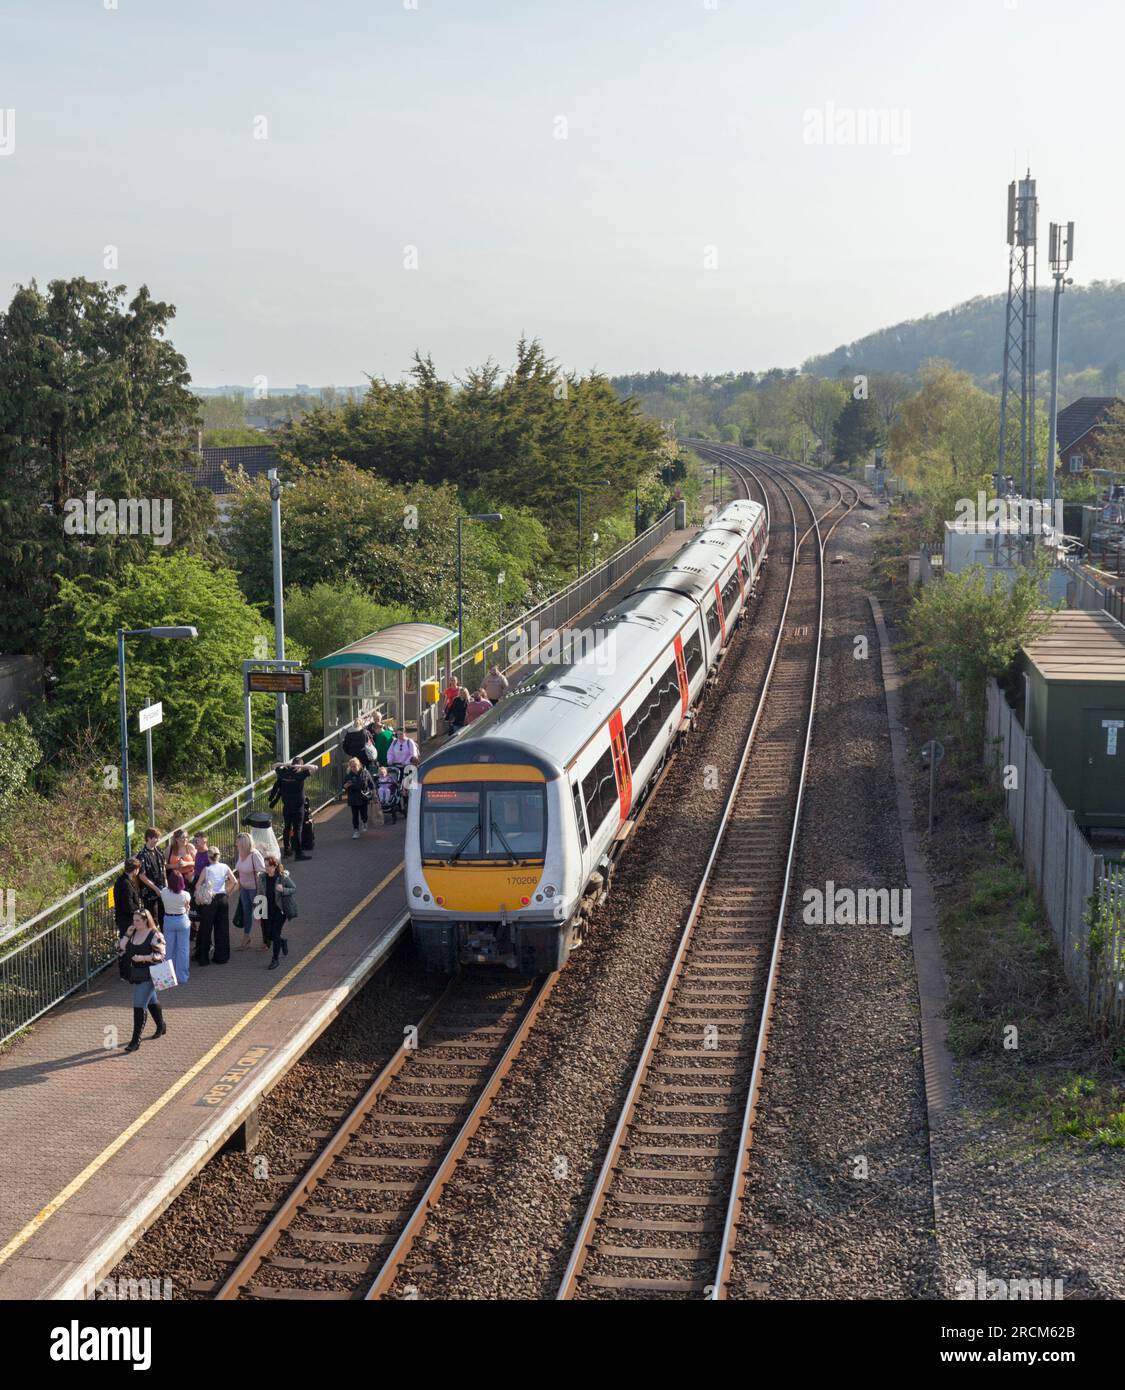 Transport For Wales class 170 Alstom Turbostar  DMU train 170206 calling at  Pencoed railway station with passengers leaving the train Stock Photo